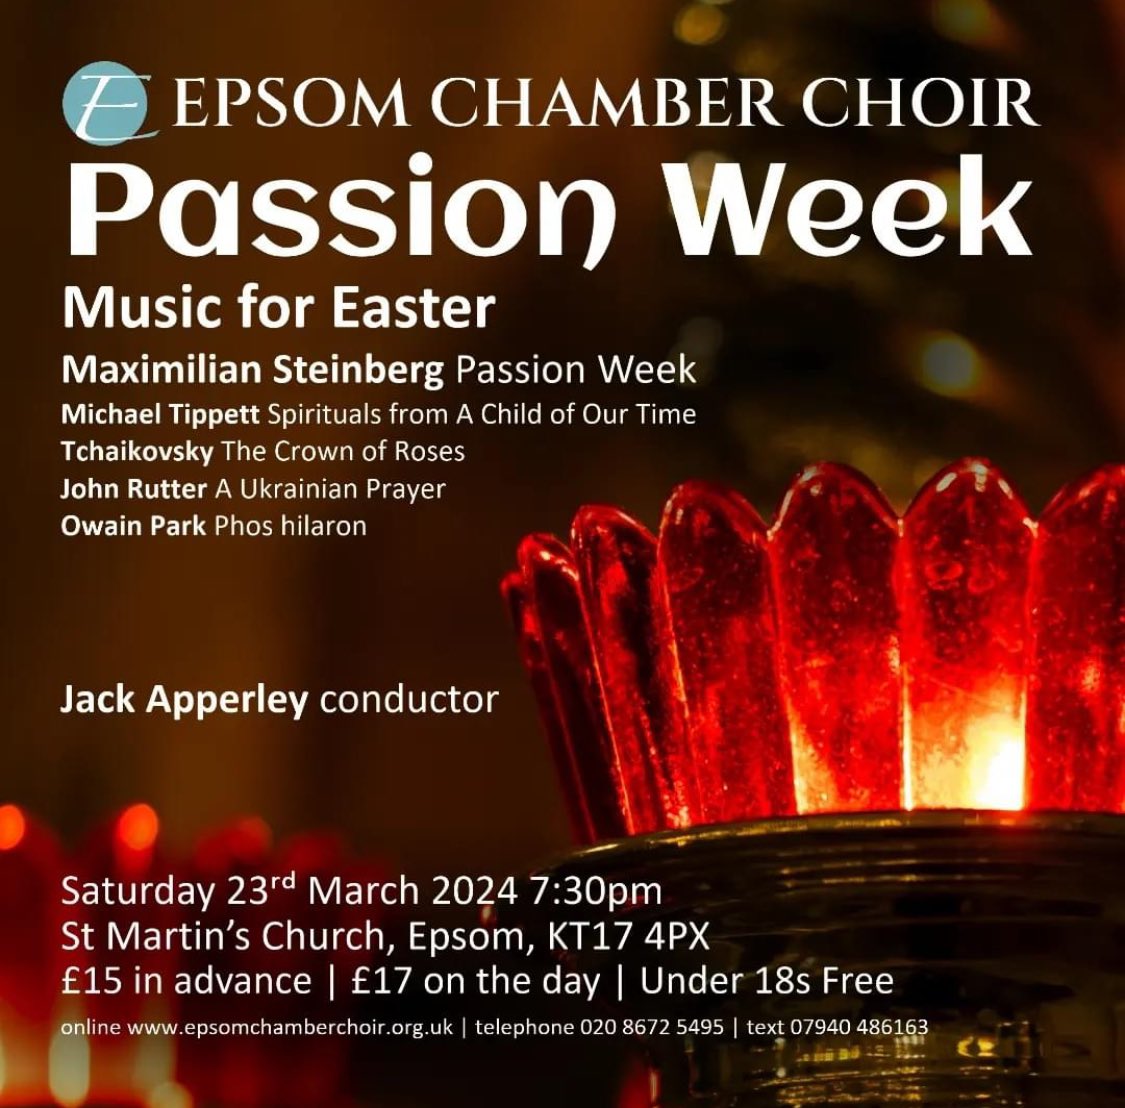 ✨ Our concert is this Saturday! ✨ A rare chance to hear #Steinberg’s “Passion Week” masterpiece. Also #Tippett’s “Spirituals” - a firm favourite of the choir’s; @johnmrutter’s ‘A Ukrainian Prayer” and beautiful pieces by Tchaikovsky and @owainpark . Conducted by @jdeapperley